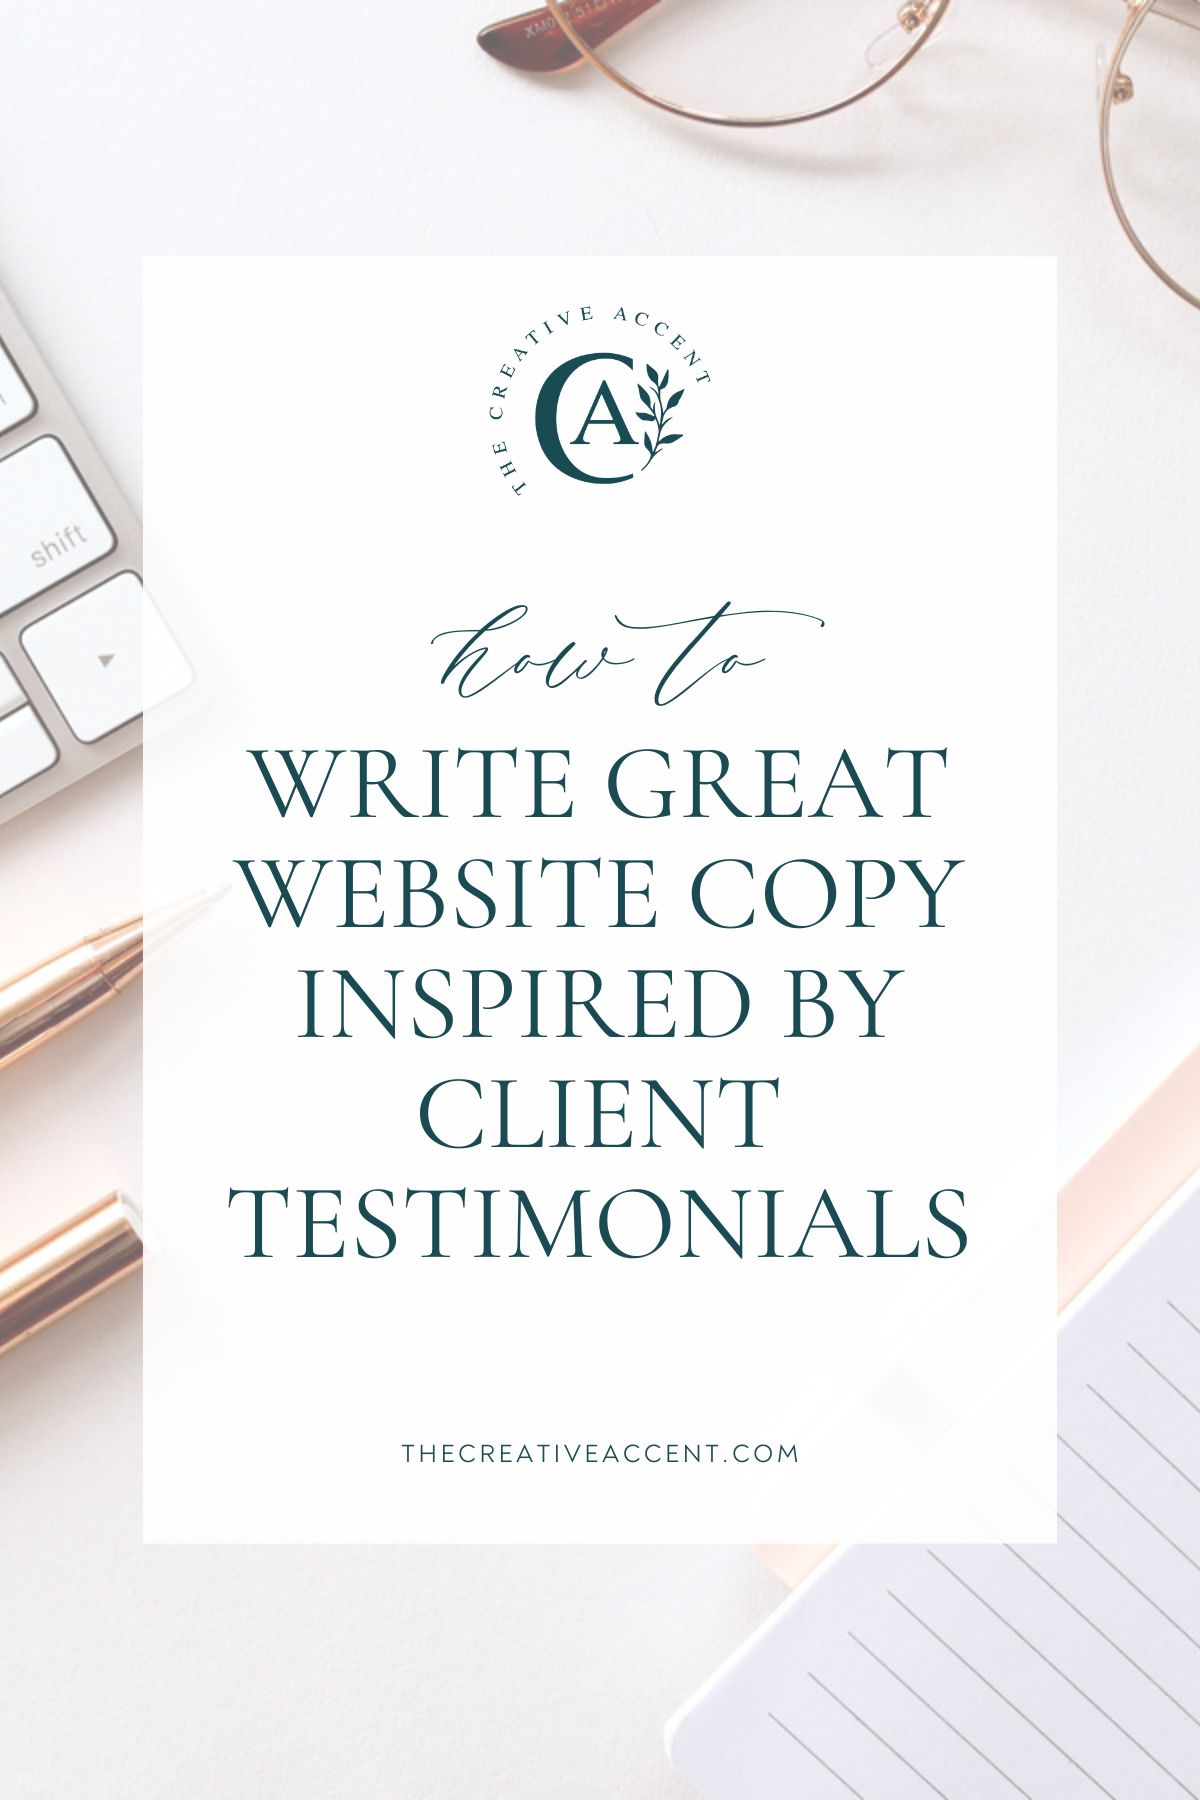 image with post title: How to write great website copy inspired by client testimonials